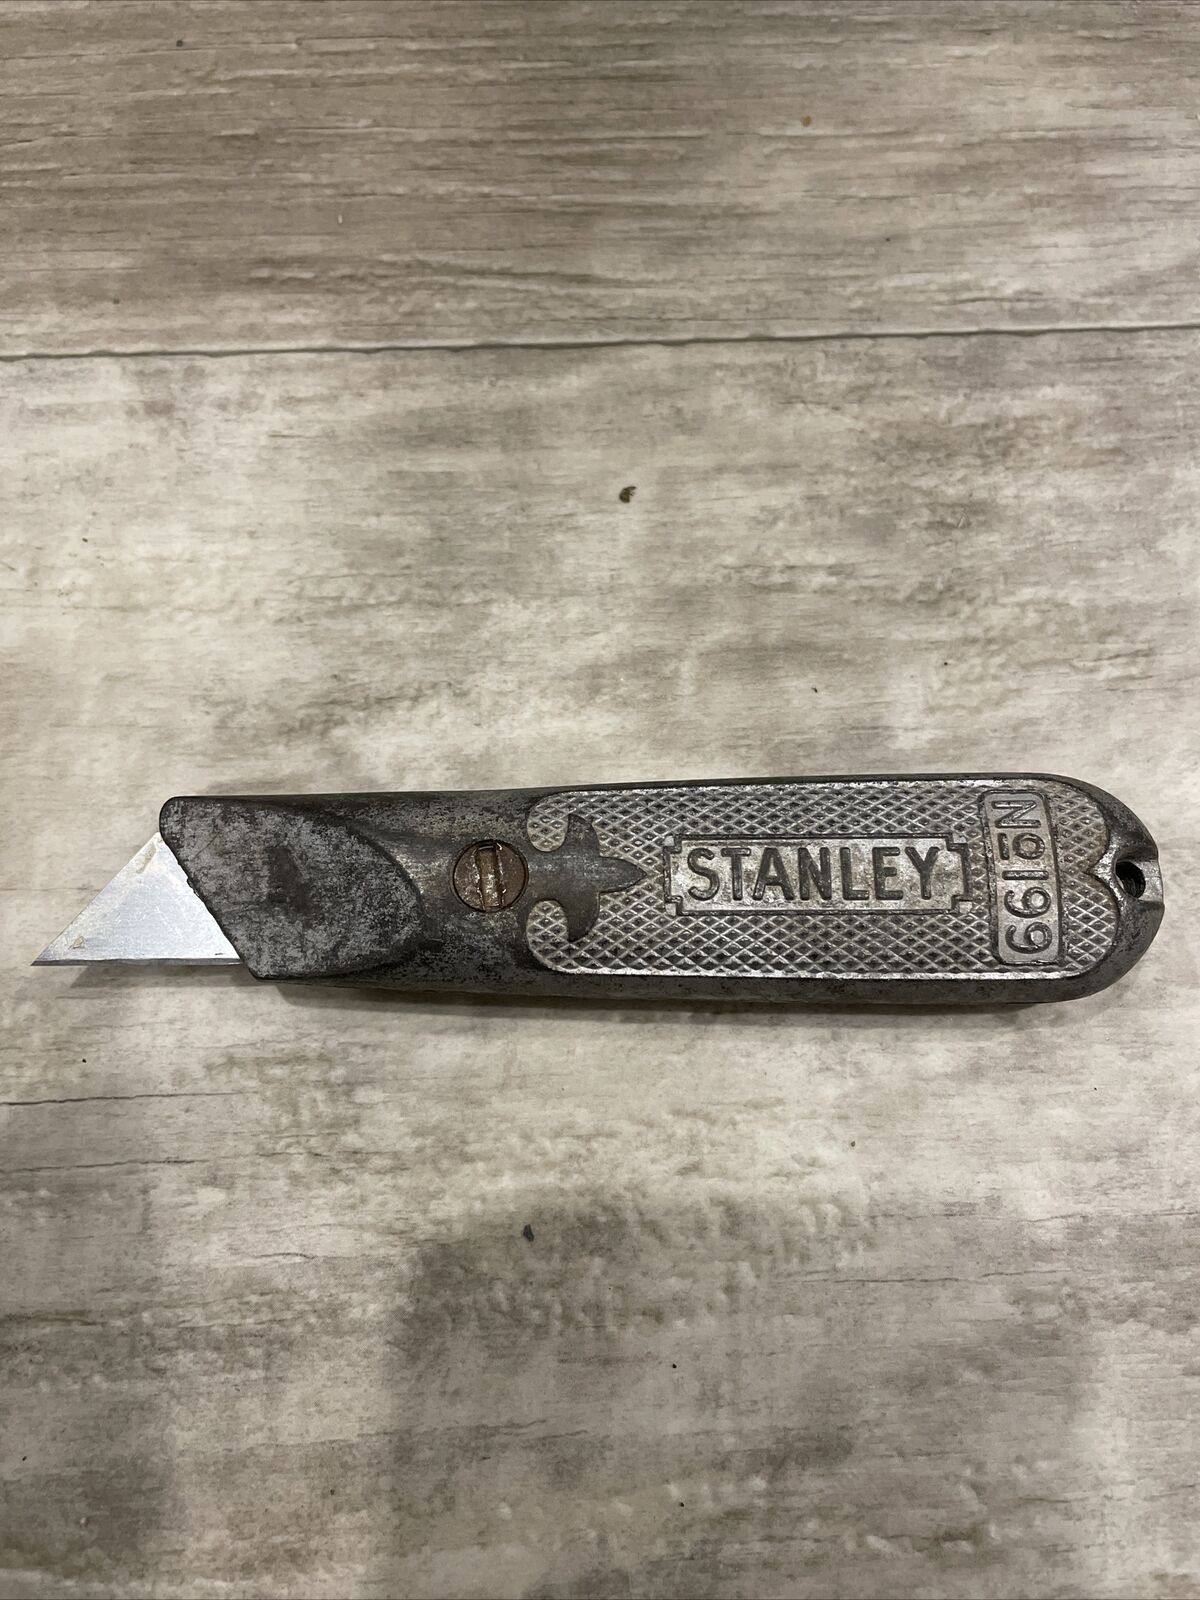 Vintage Stanley No.199 Fixed Blade Utility Knife.